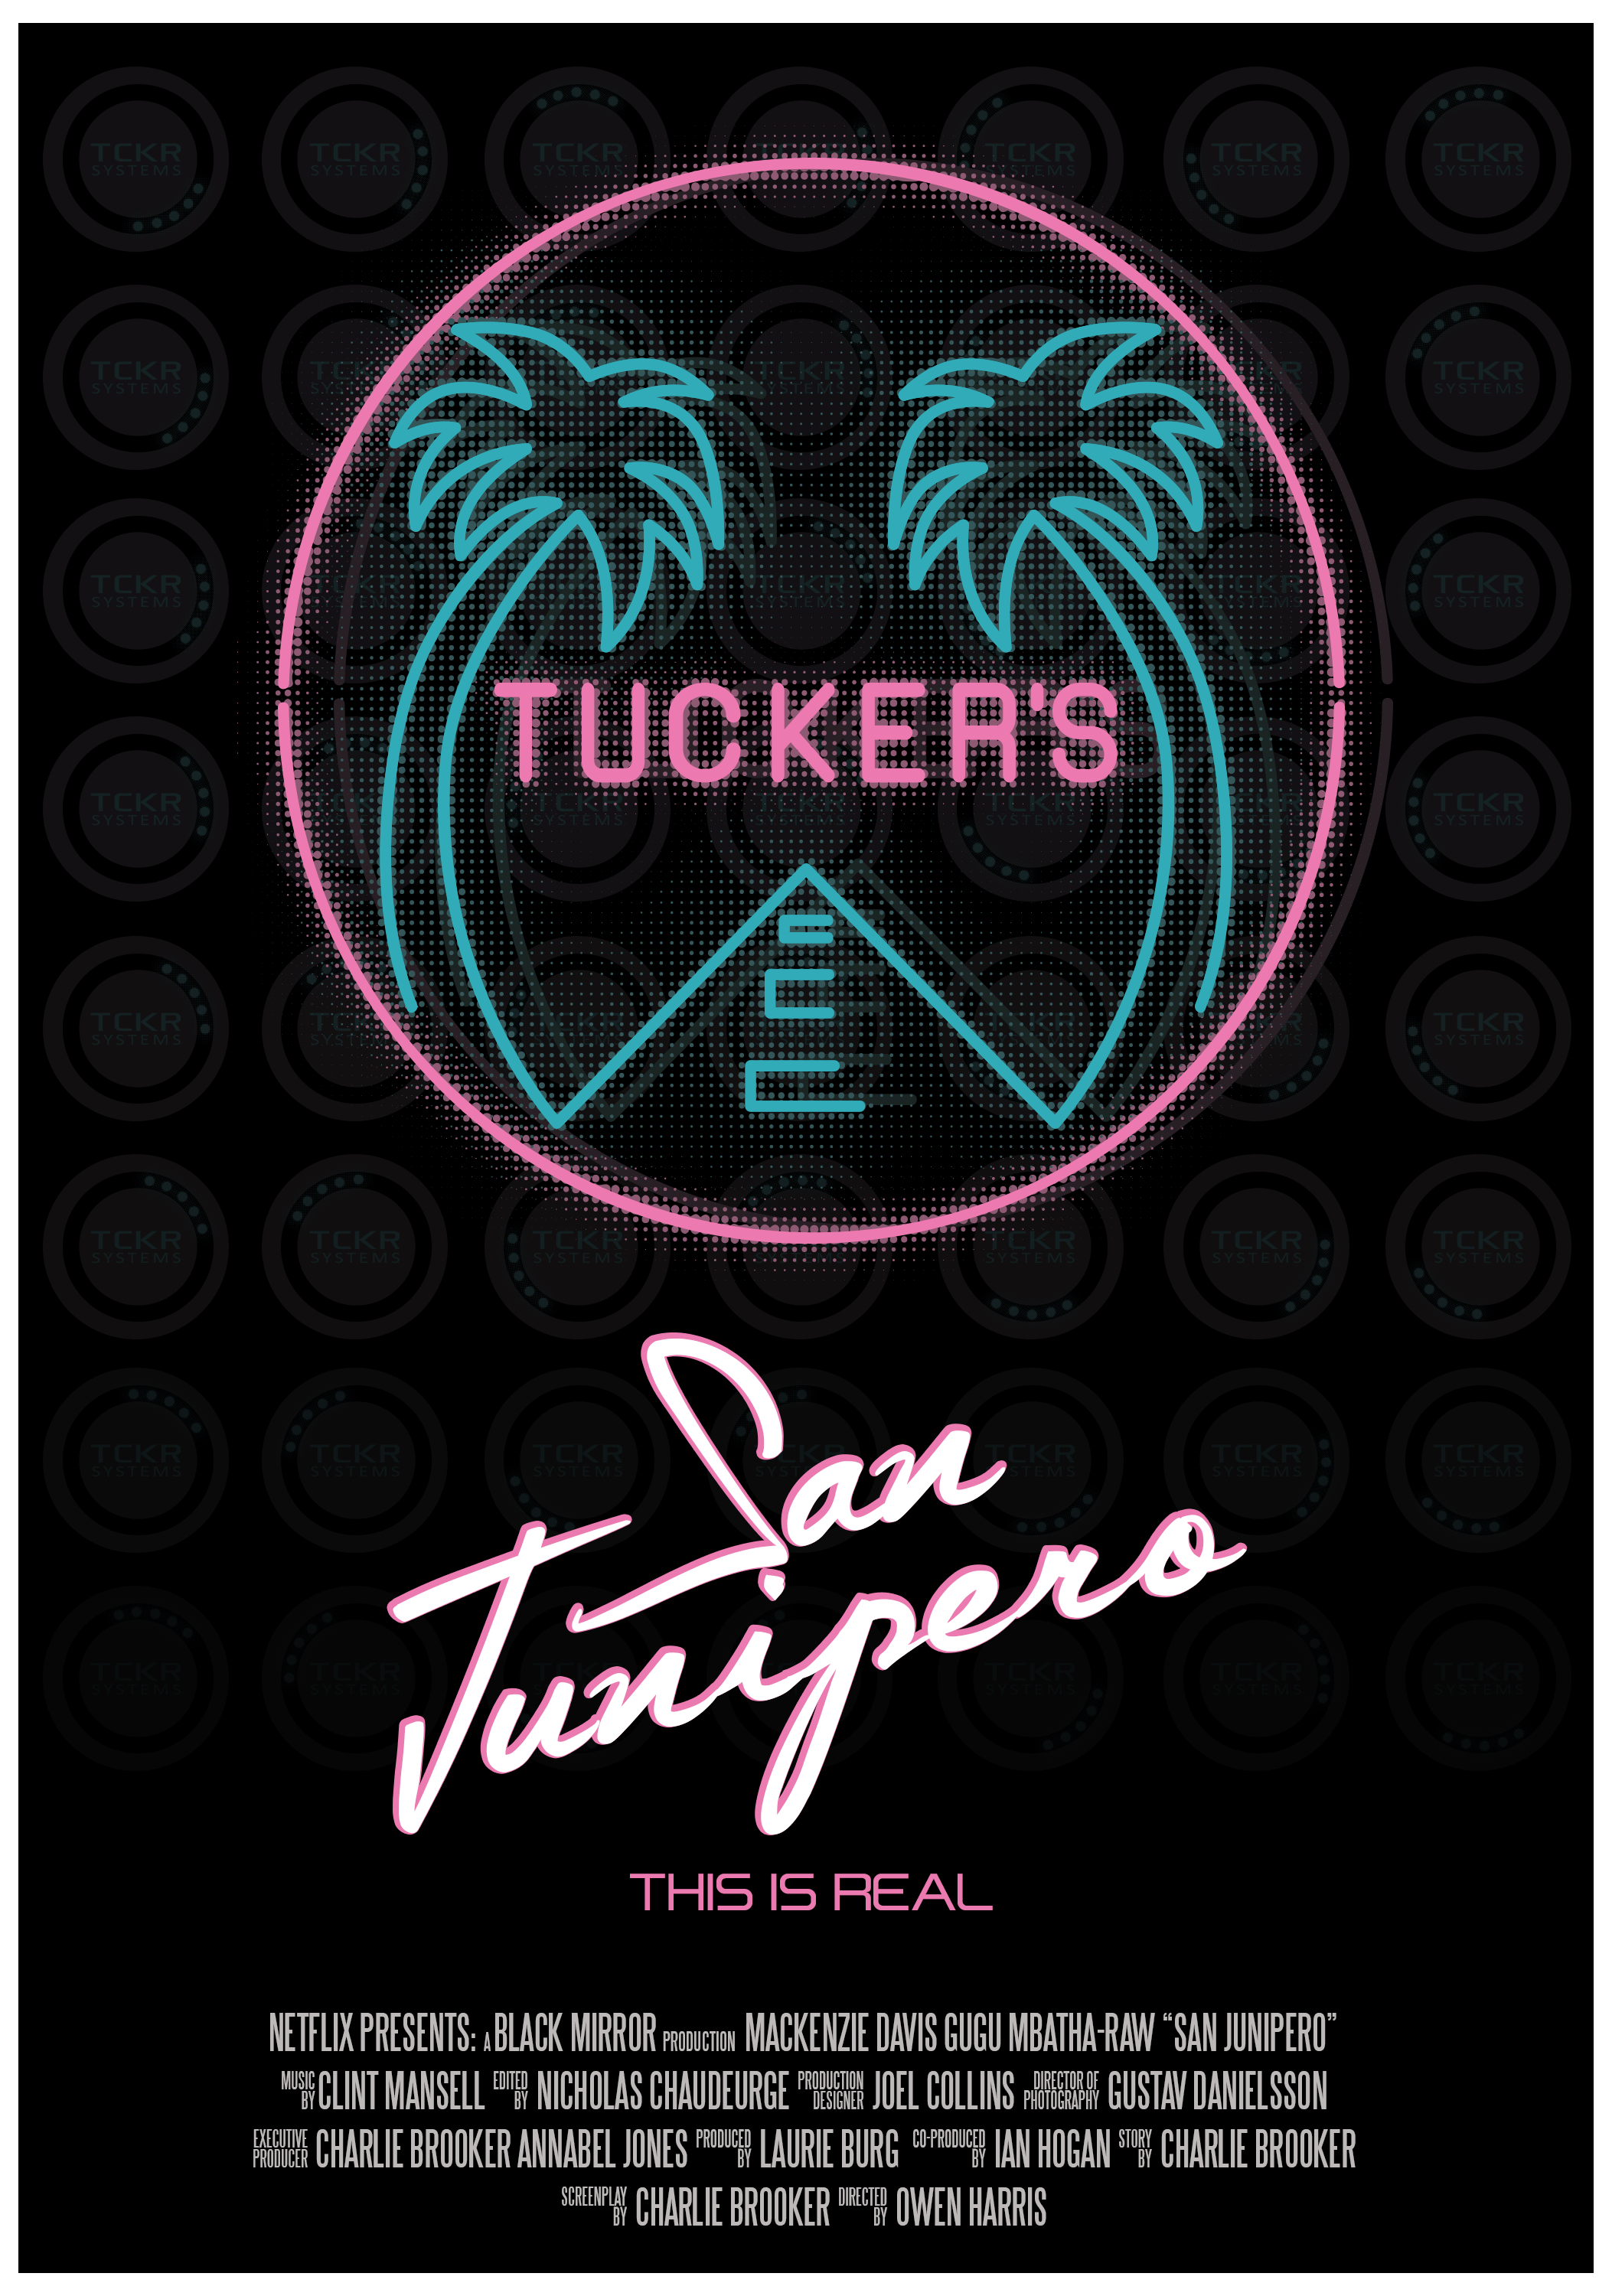 Decided to put together a movie poster for San Junipero. What do